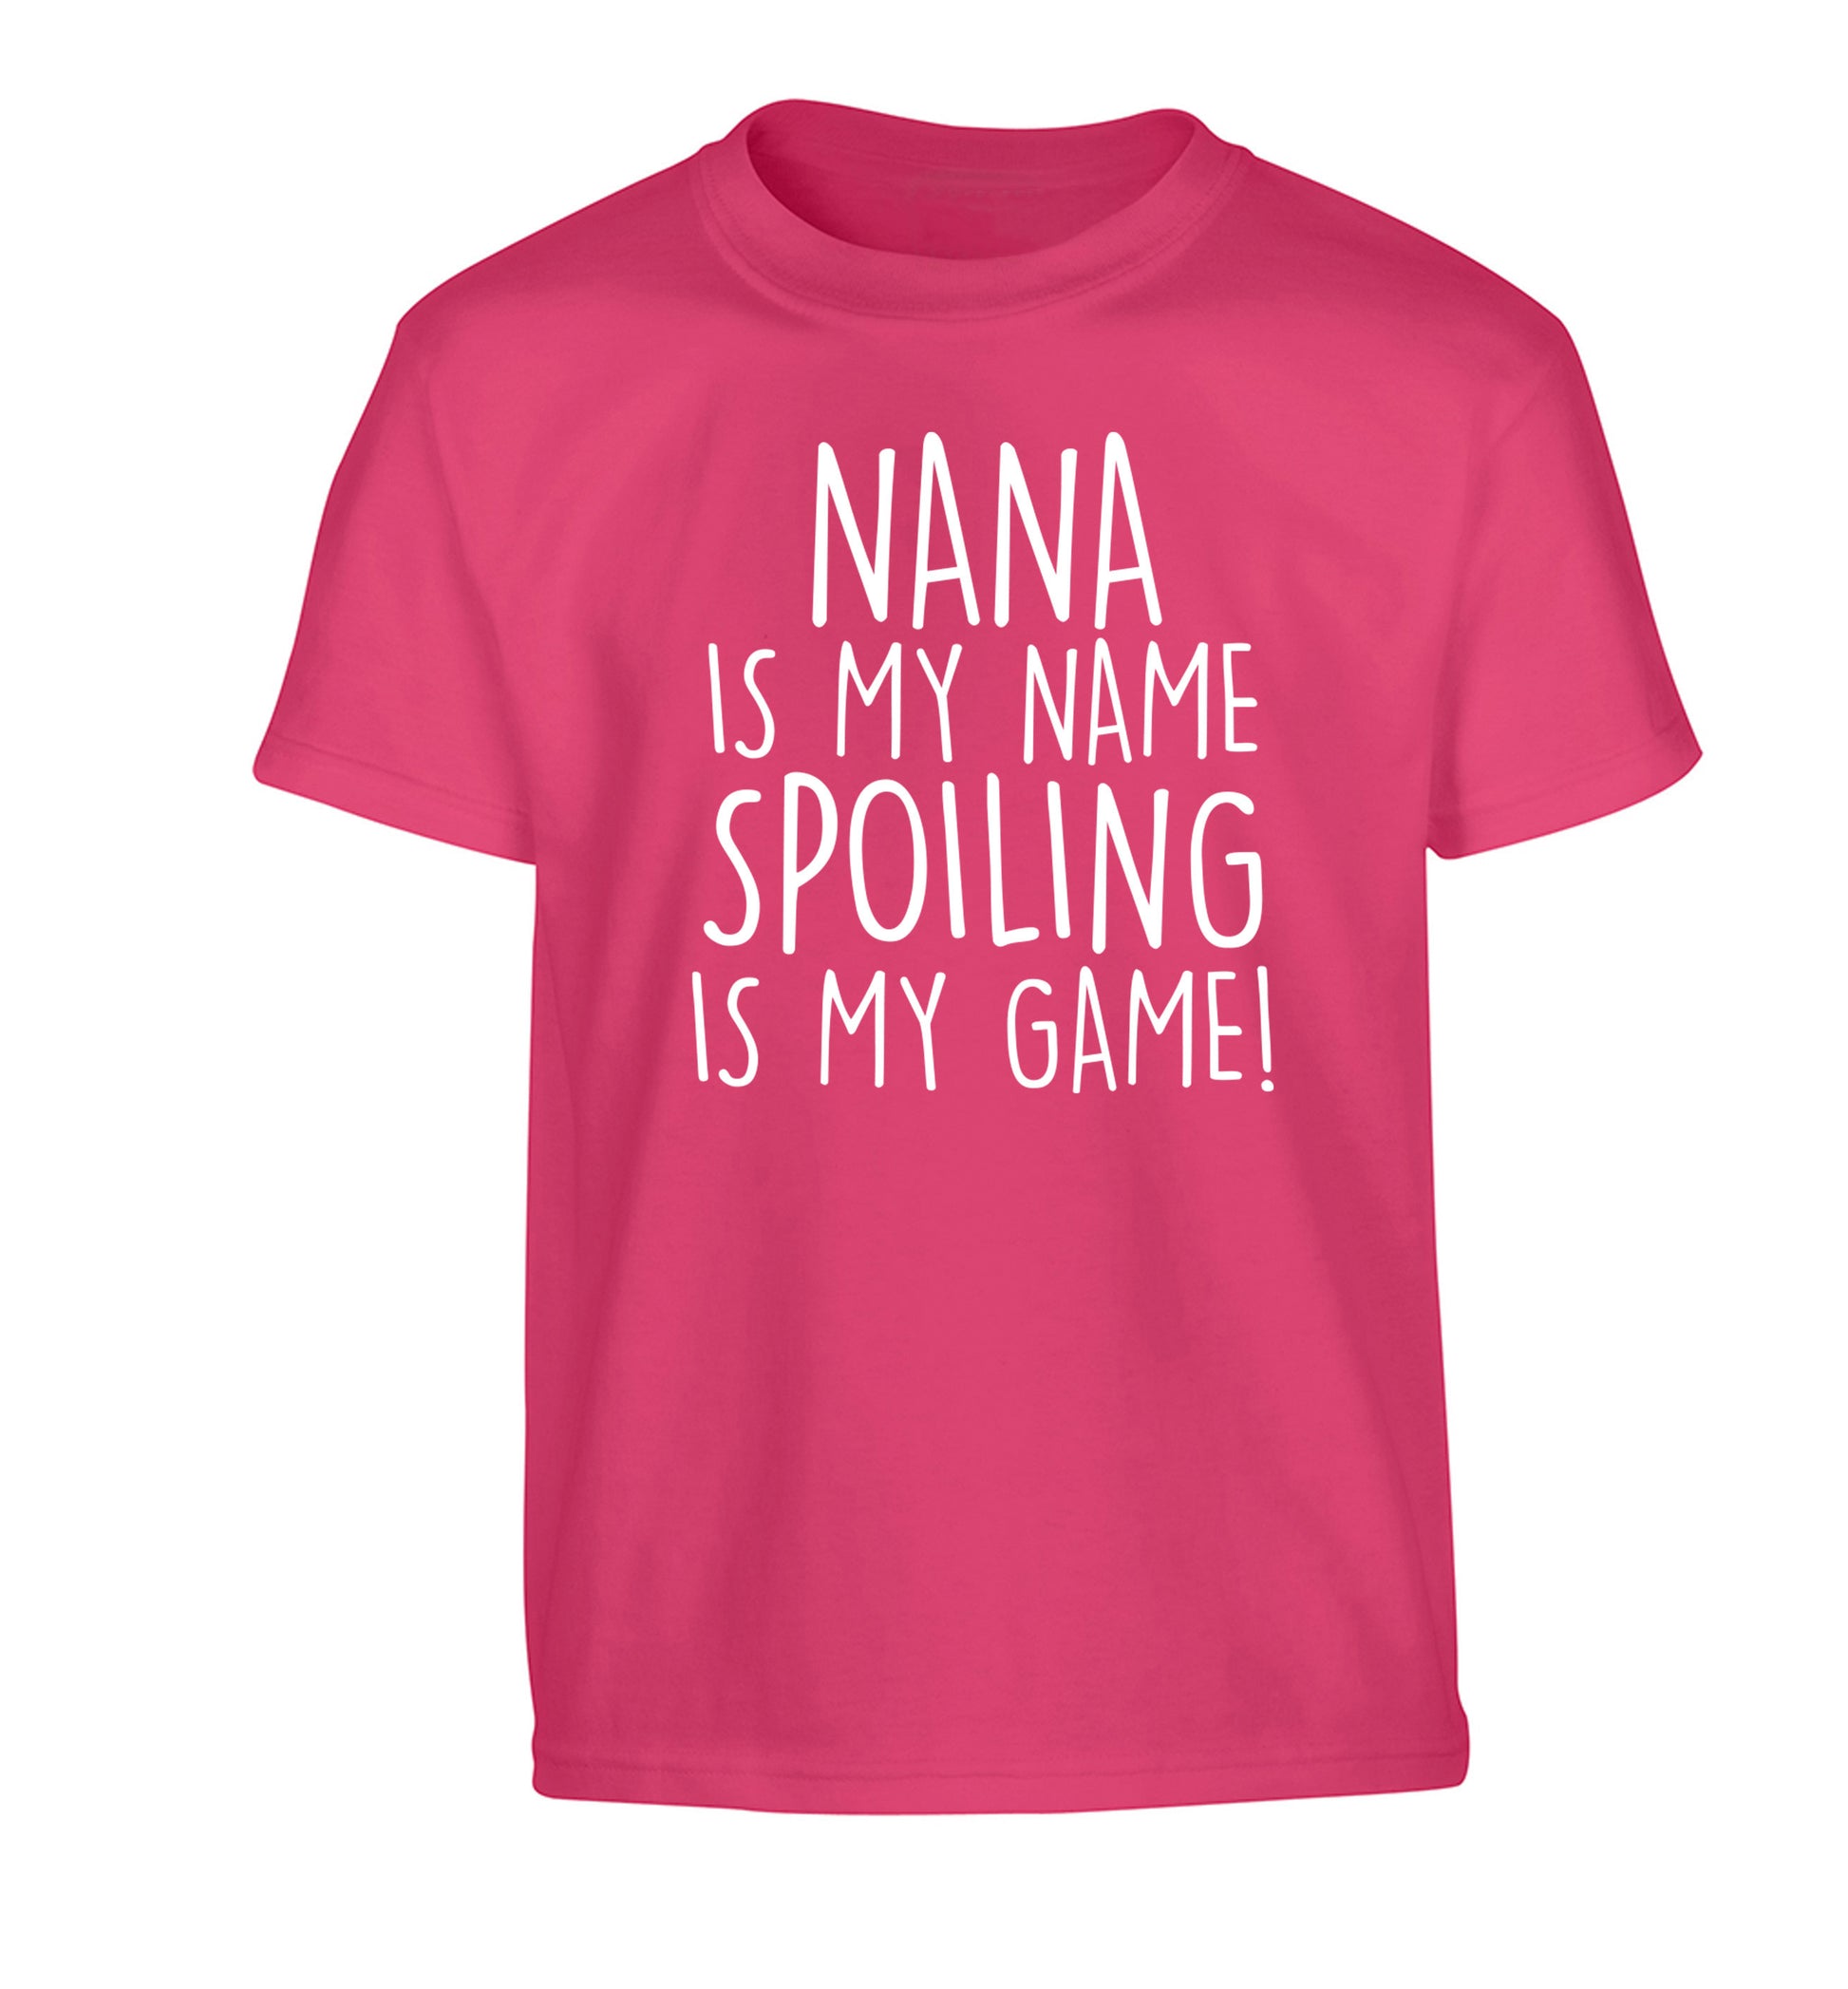 Nana is my name, spoiling is my game Children's pink Tshirt 12-14 Years